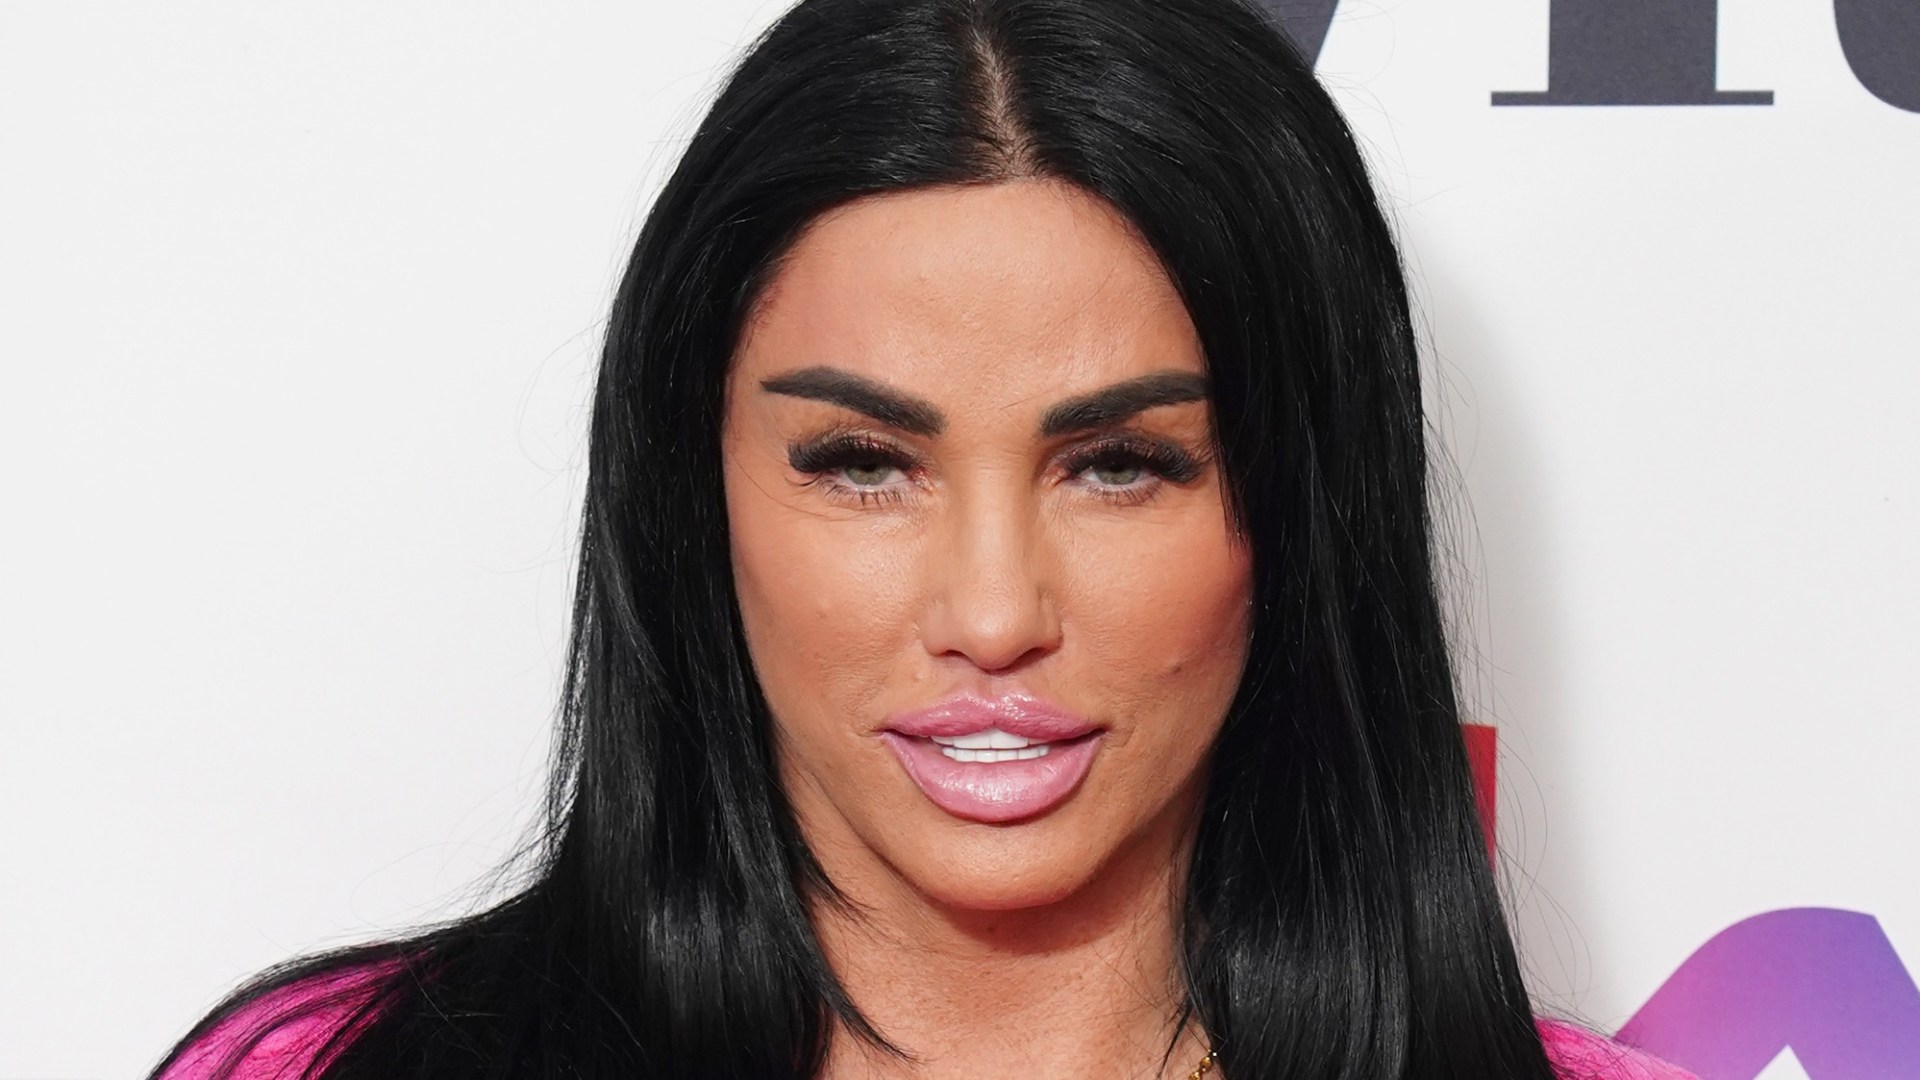 I am stressed admits Katie Price - as she reveals real reason she WONT attend bankruptcy court despite threat of jail [Video]